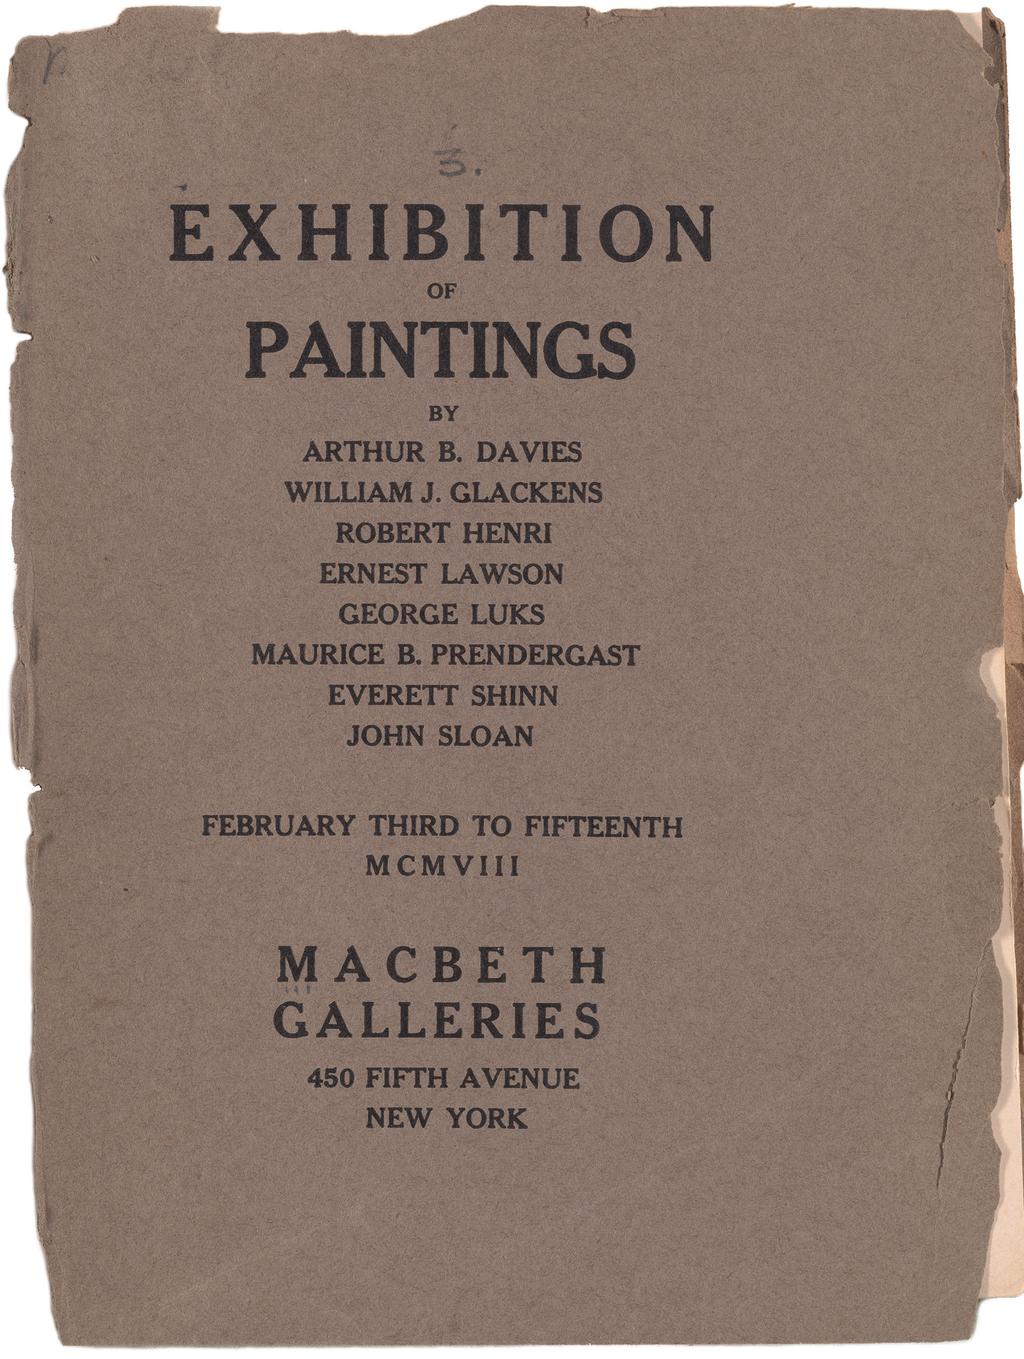 and like that... the y re gone 5 1.1 Front page of the exhibition catalog, Exhibition of Paintings by Arthur B. Davies, William J. Glackens, Robert Henri, Ernest Lawson, George Luks, Maurice B.